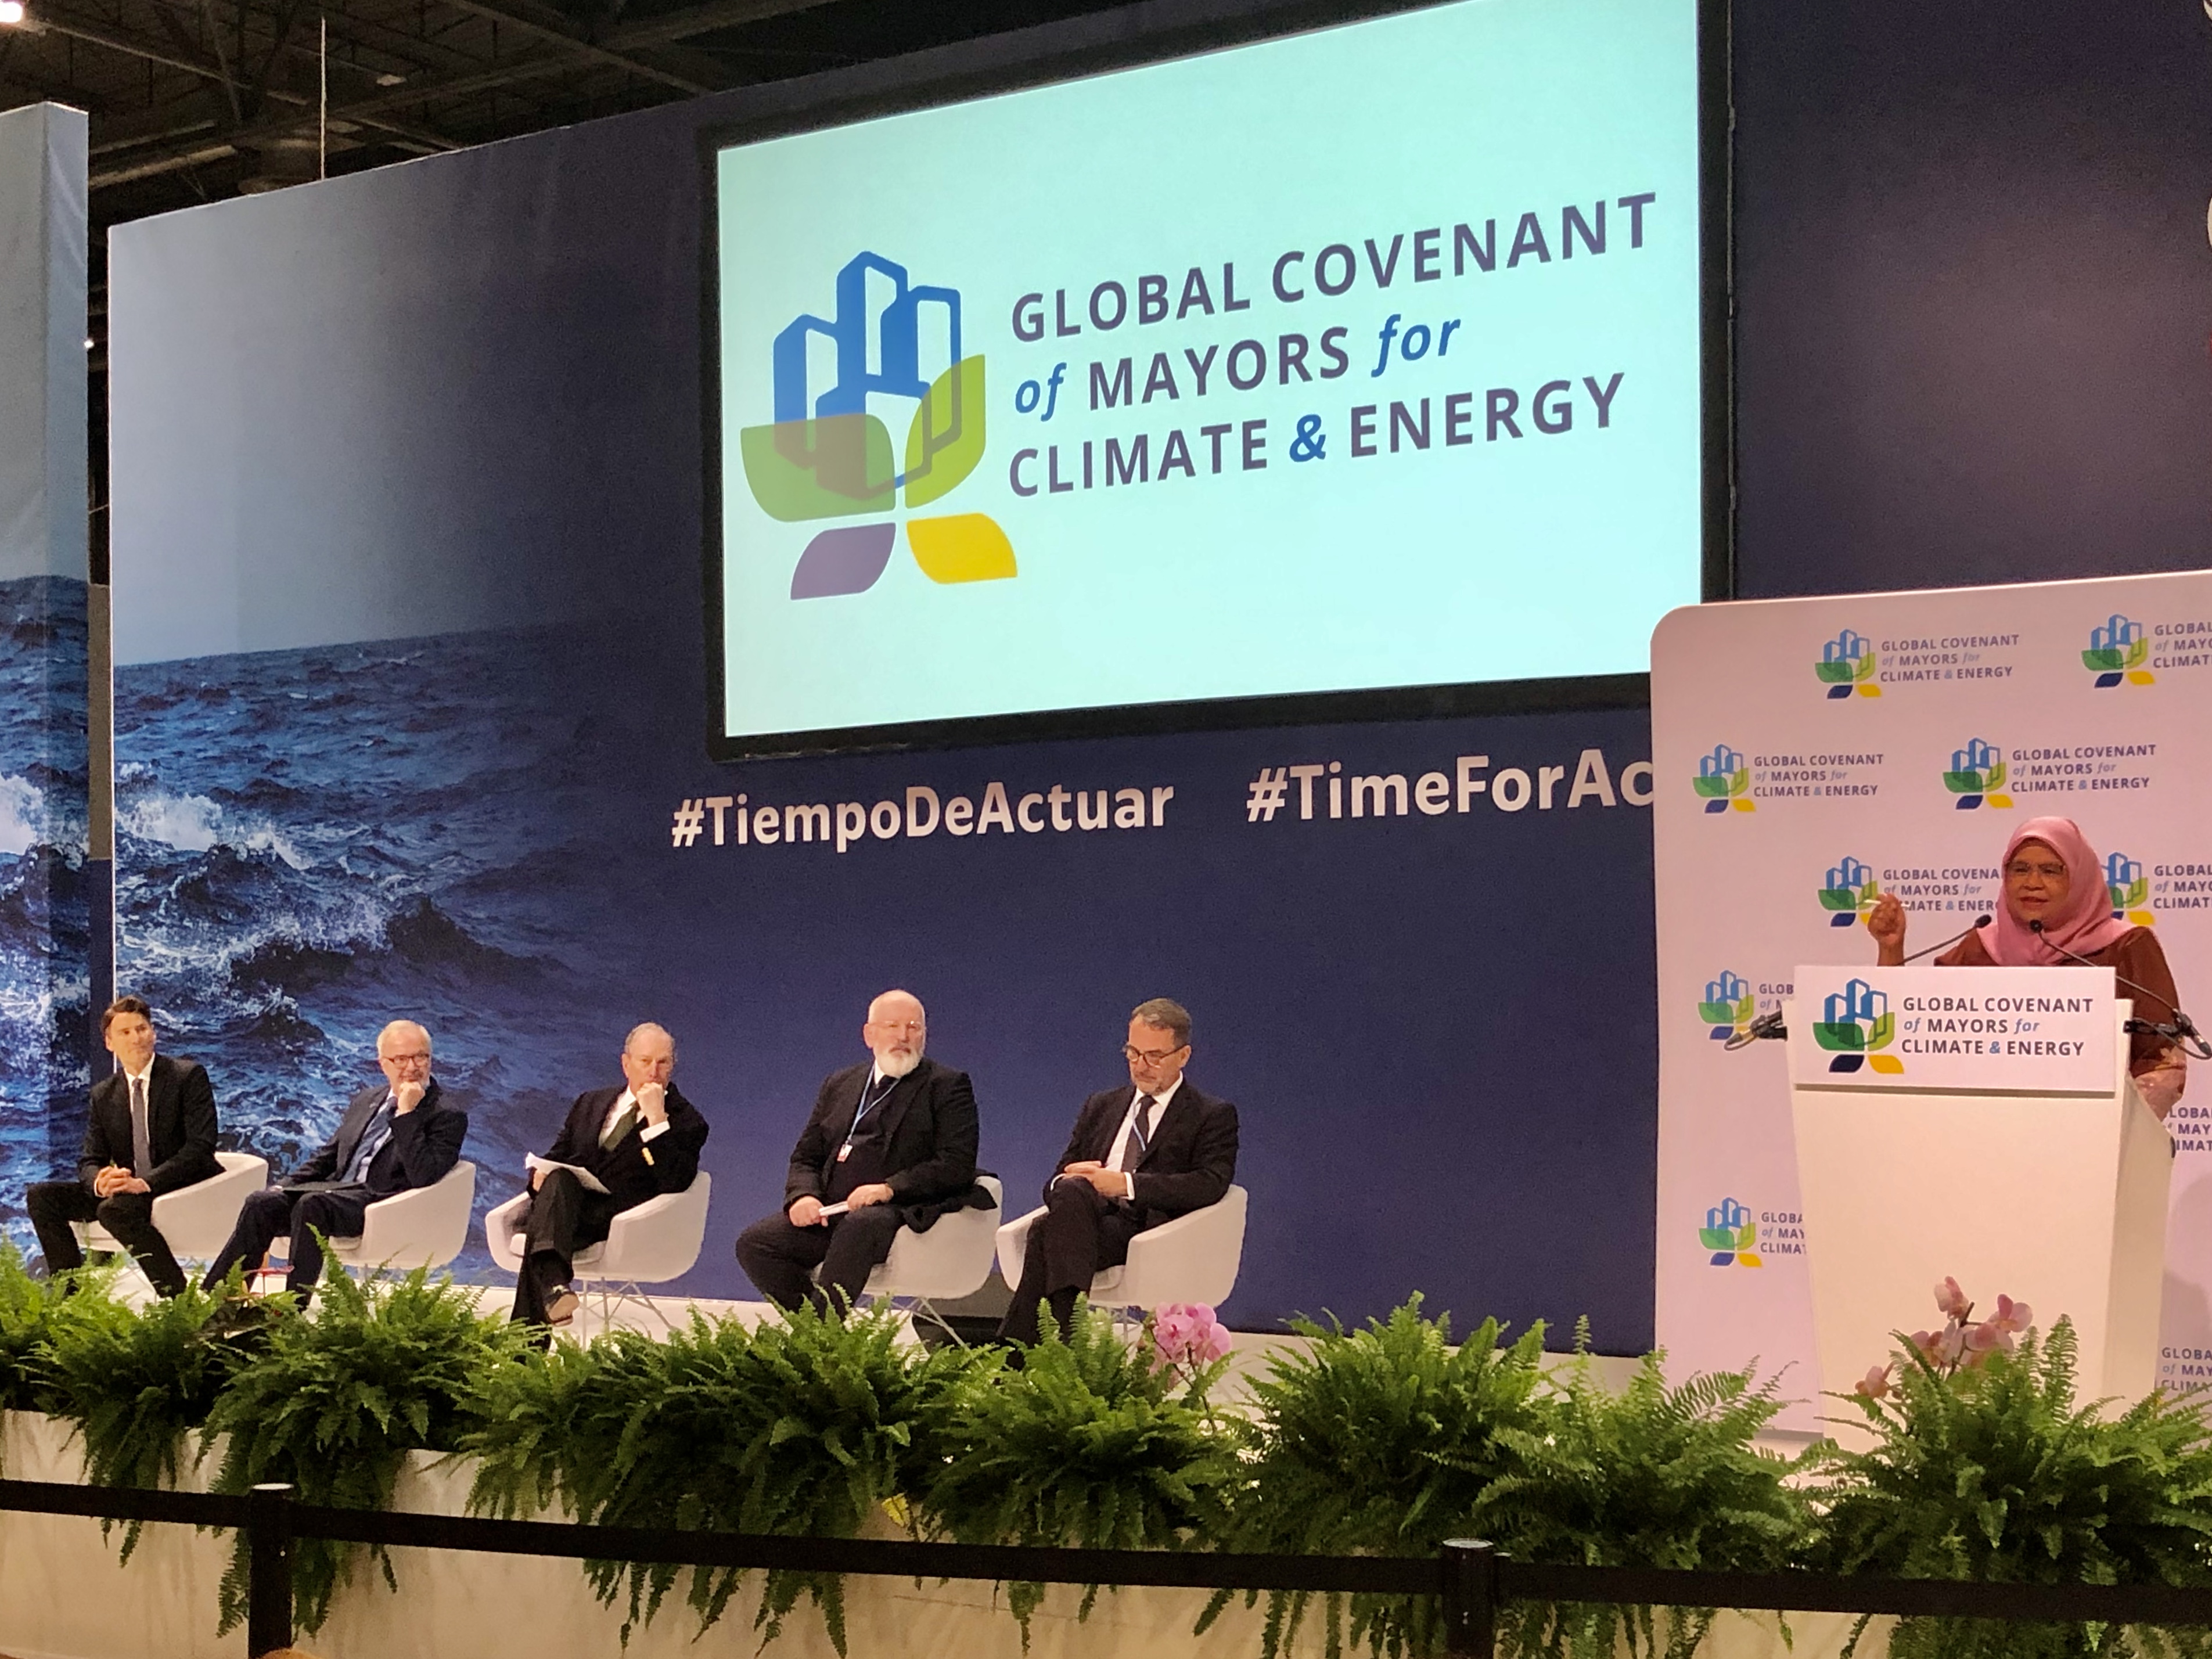 Global Covenant of Mayors for Climate and Energy